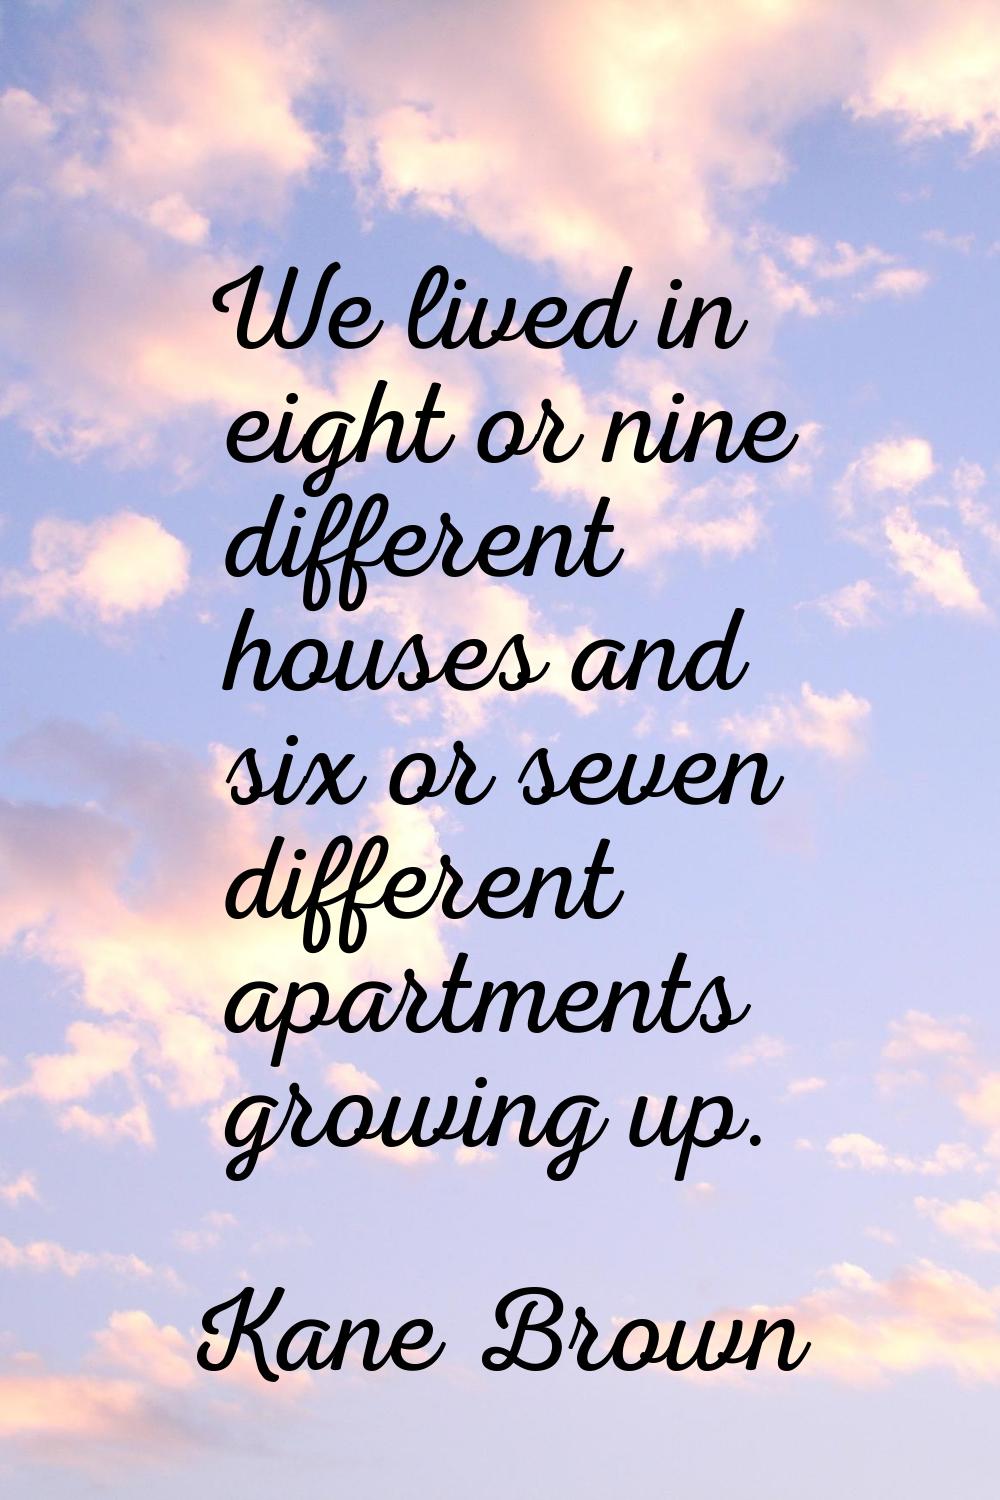 We lived in eight or nine different houses and six or seven different apartments growing up.